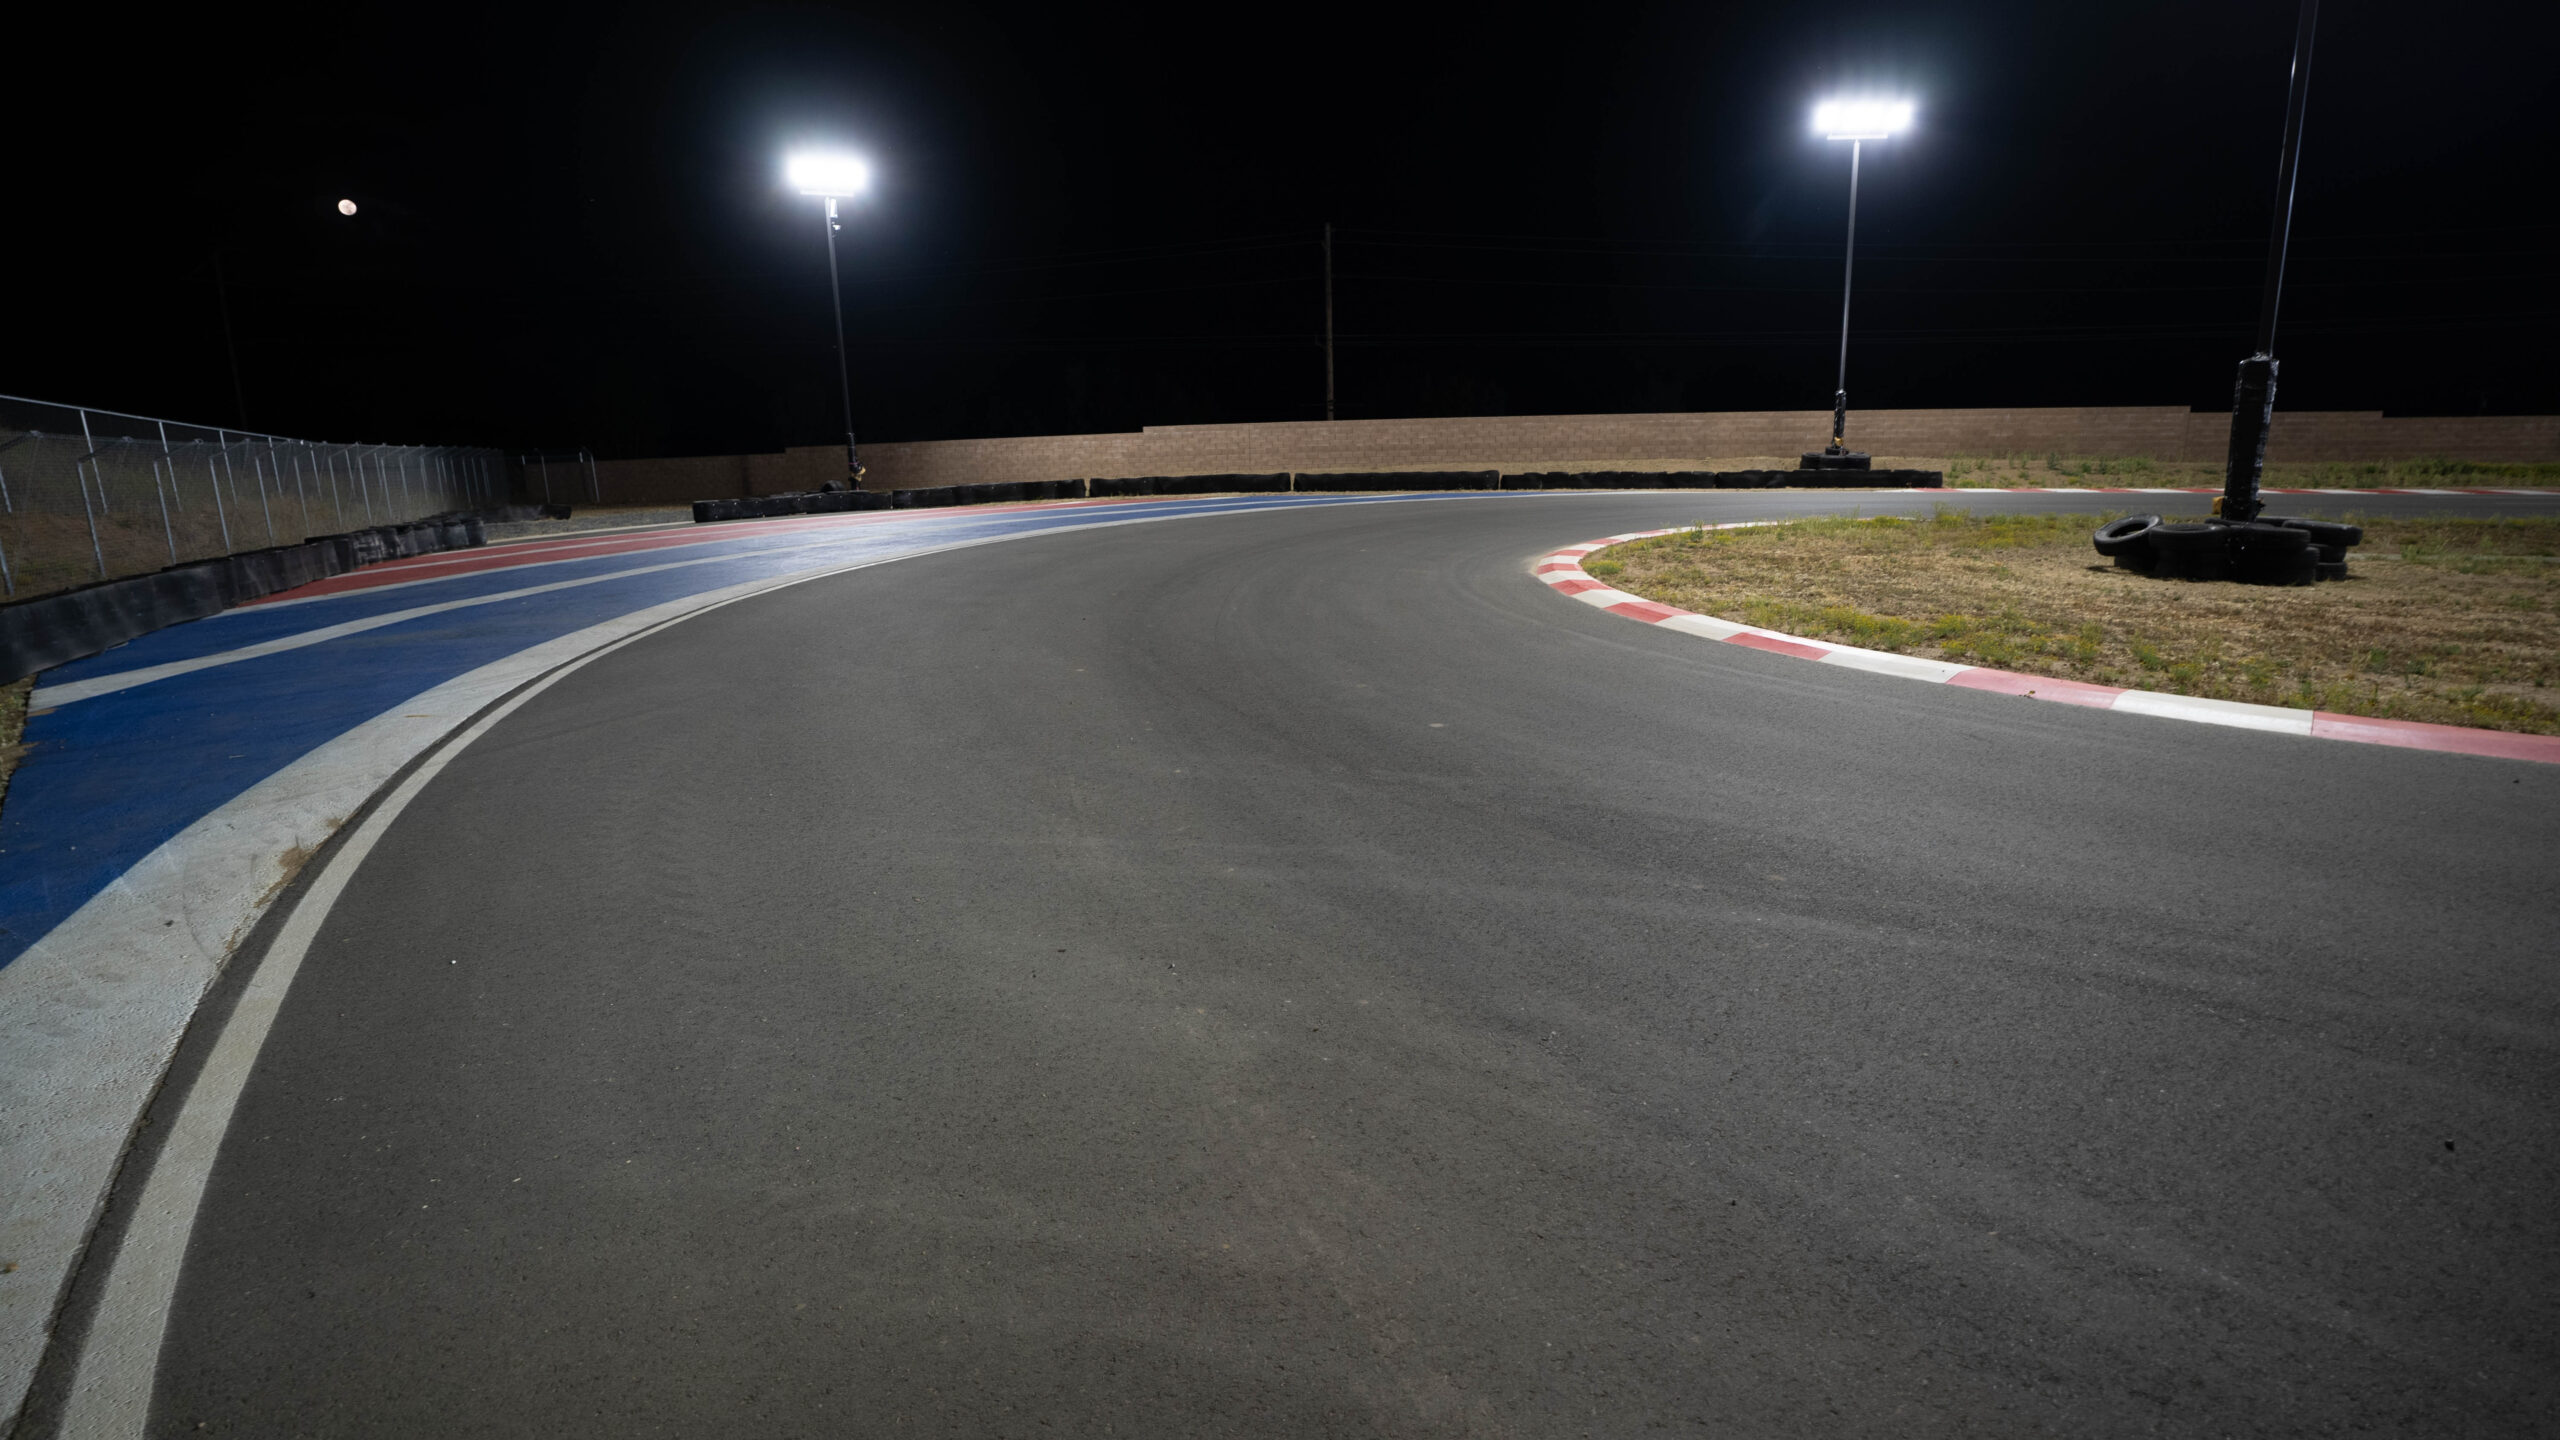 a section of track at k1 circuit with lights on either side